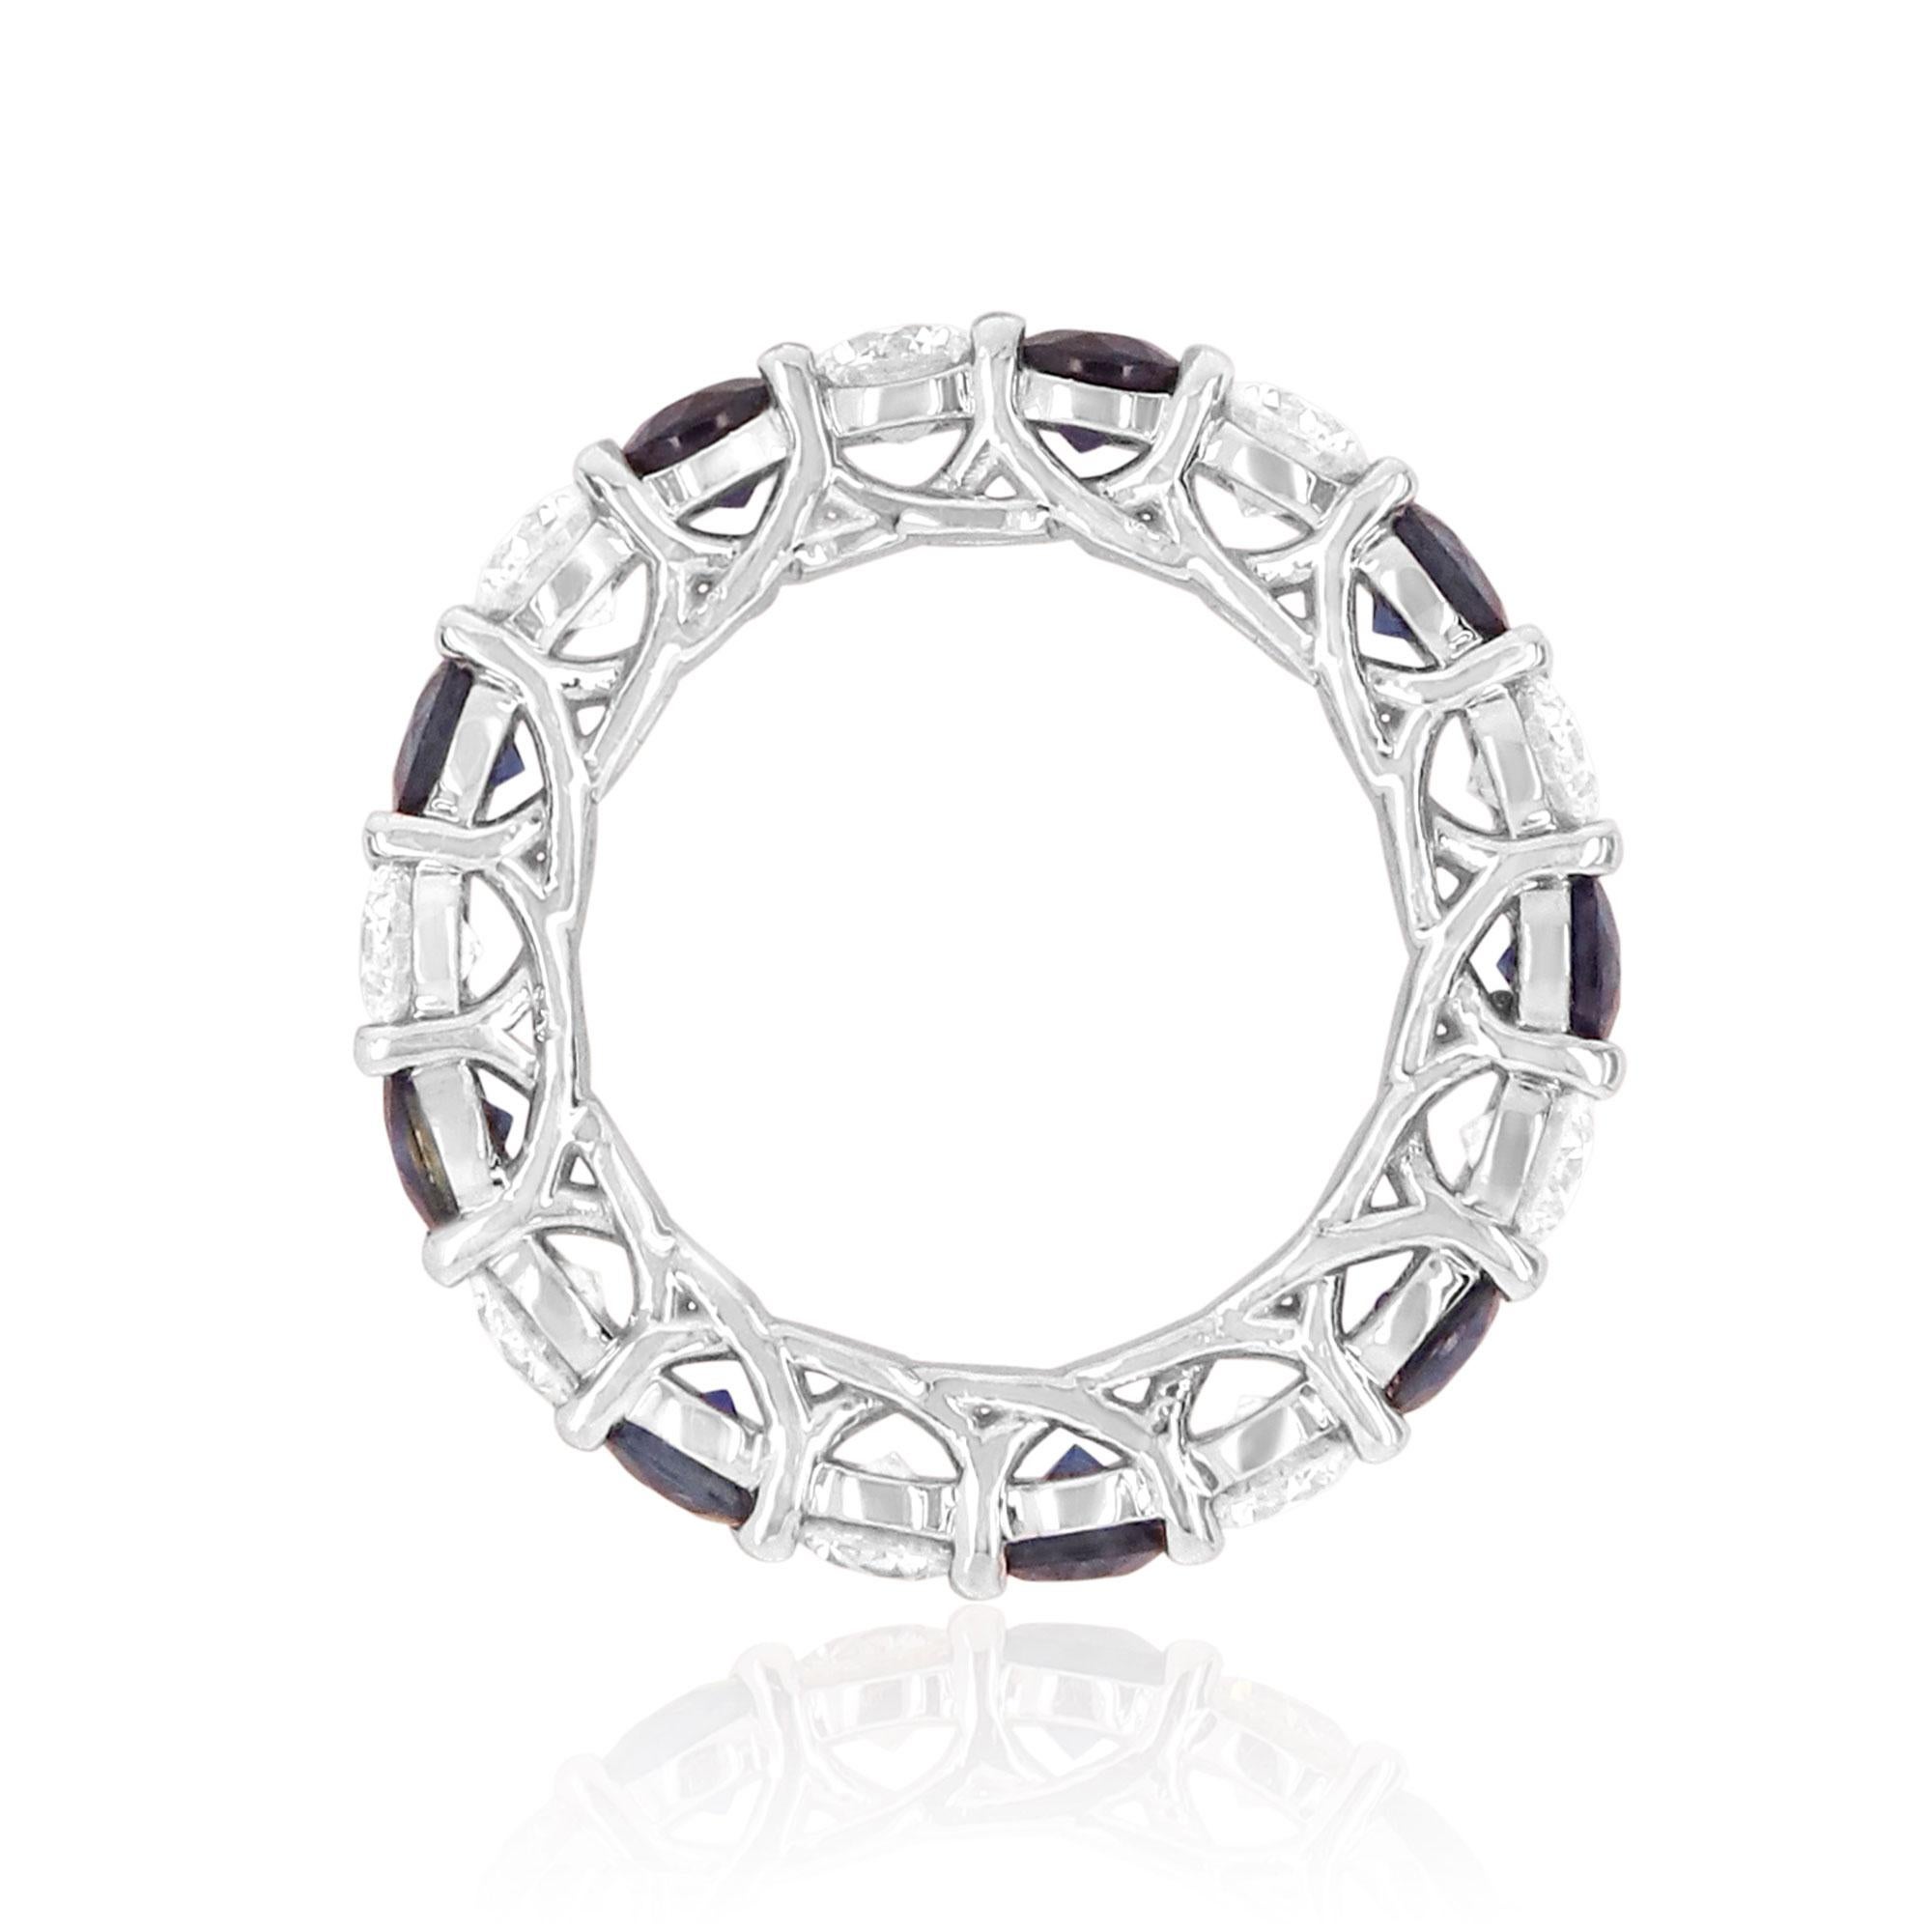 Material: 18k White Gold
Gemstones: 9 Round Blue Sapphires at 3.20 Carats
Diamond Details: 9 Brilliant Round White Diamonds at 2.25 Carats. VS Clarity / H Color. 
Ring Size: 5.75 (cannot be sized)

Fine one-of-a-kind craftsmanship meets incredible